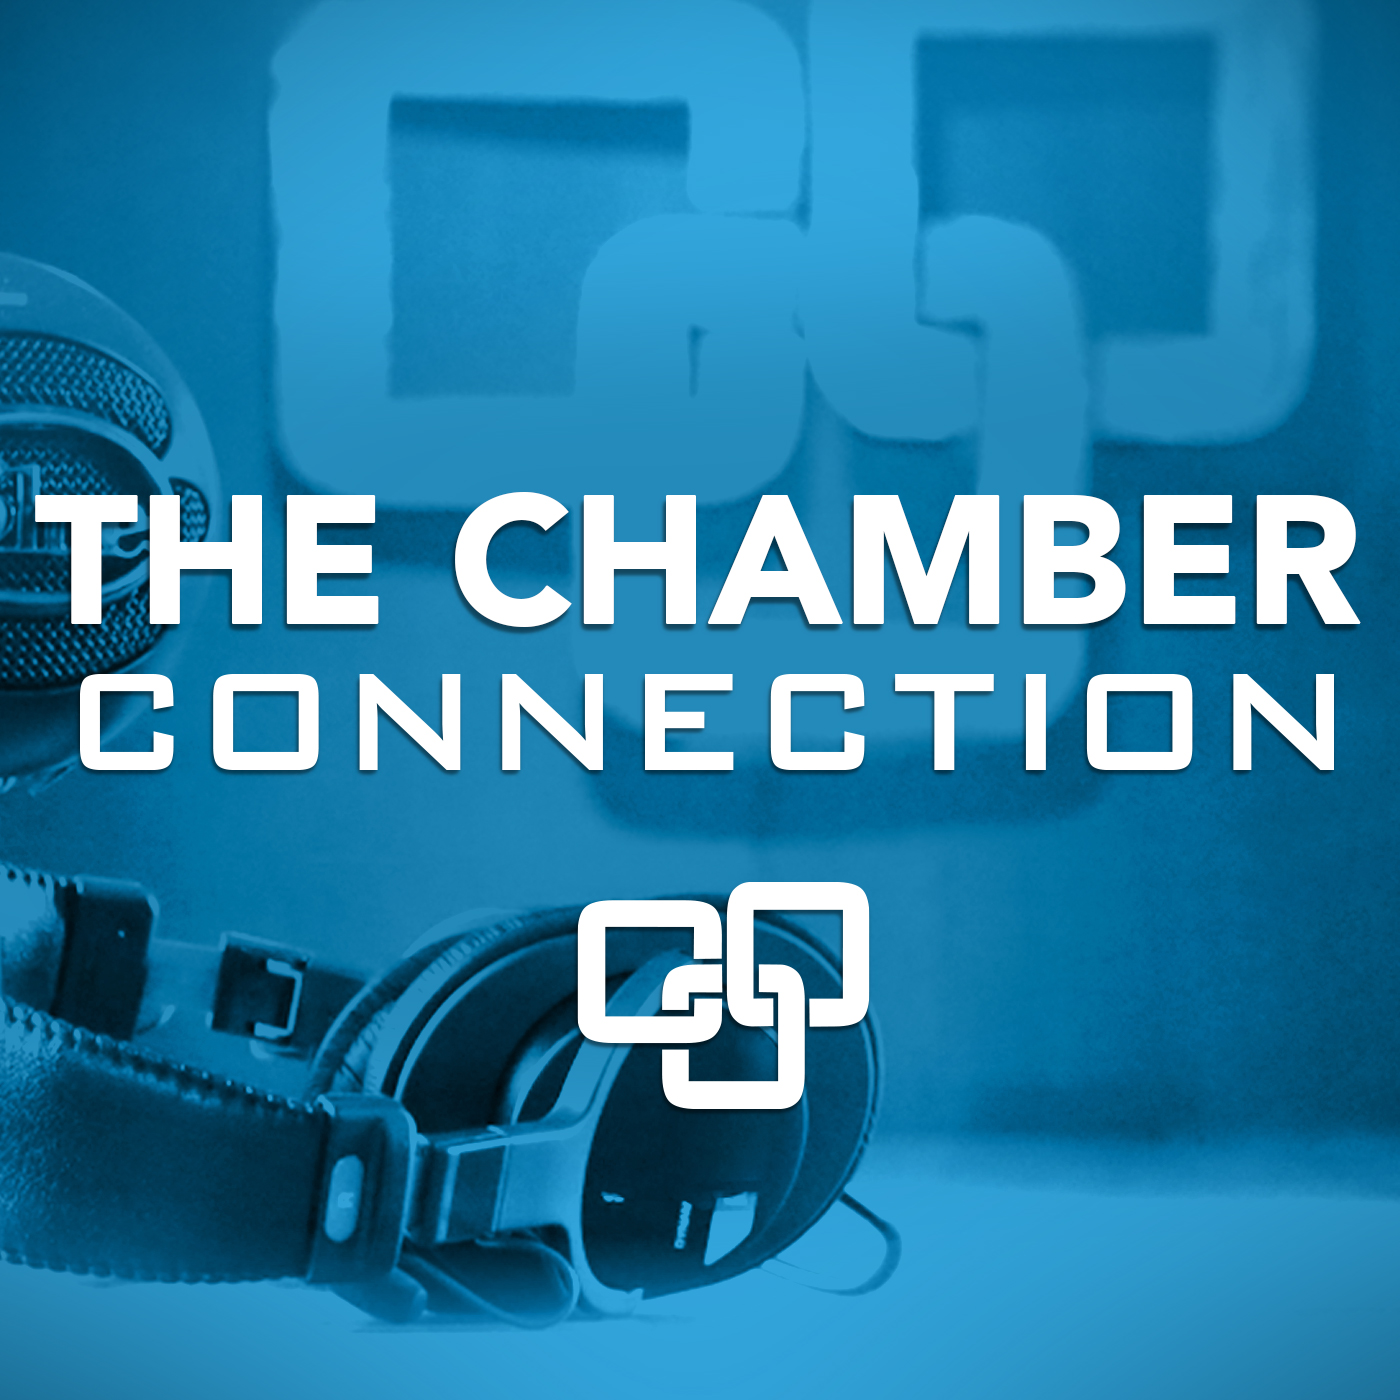 The Chamber Connection featuring Seth Arndorfer Chief Executive Officer at Dakota Carrier Network